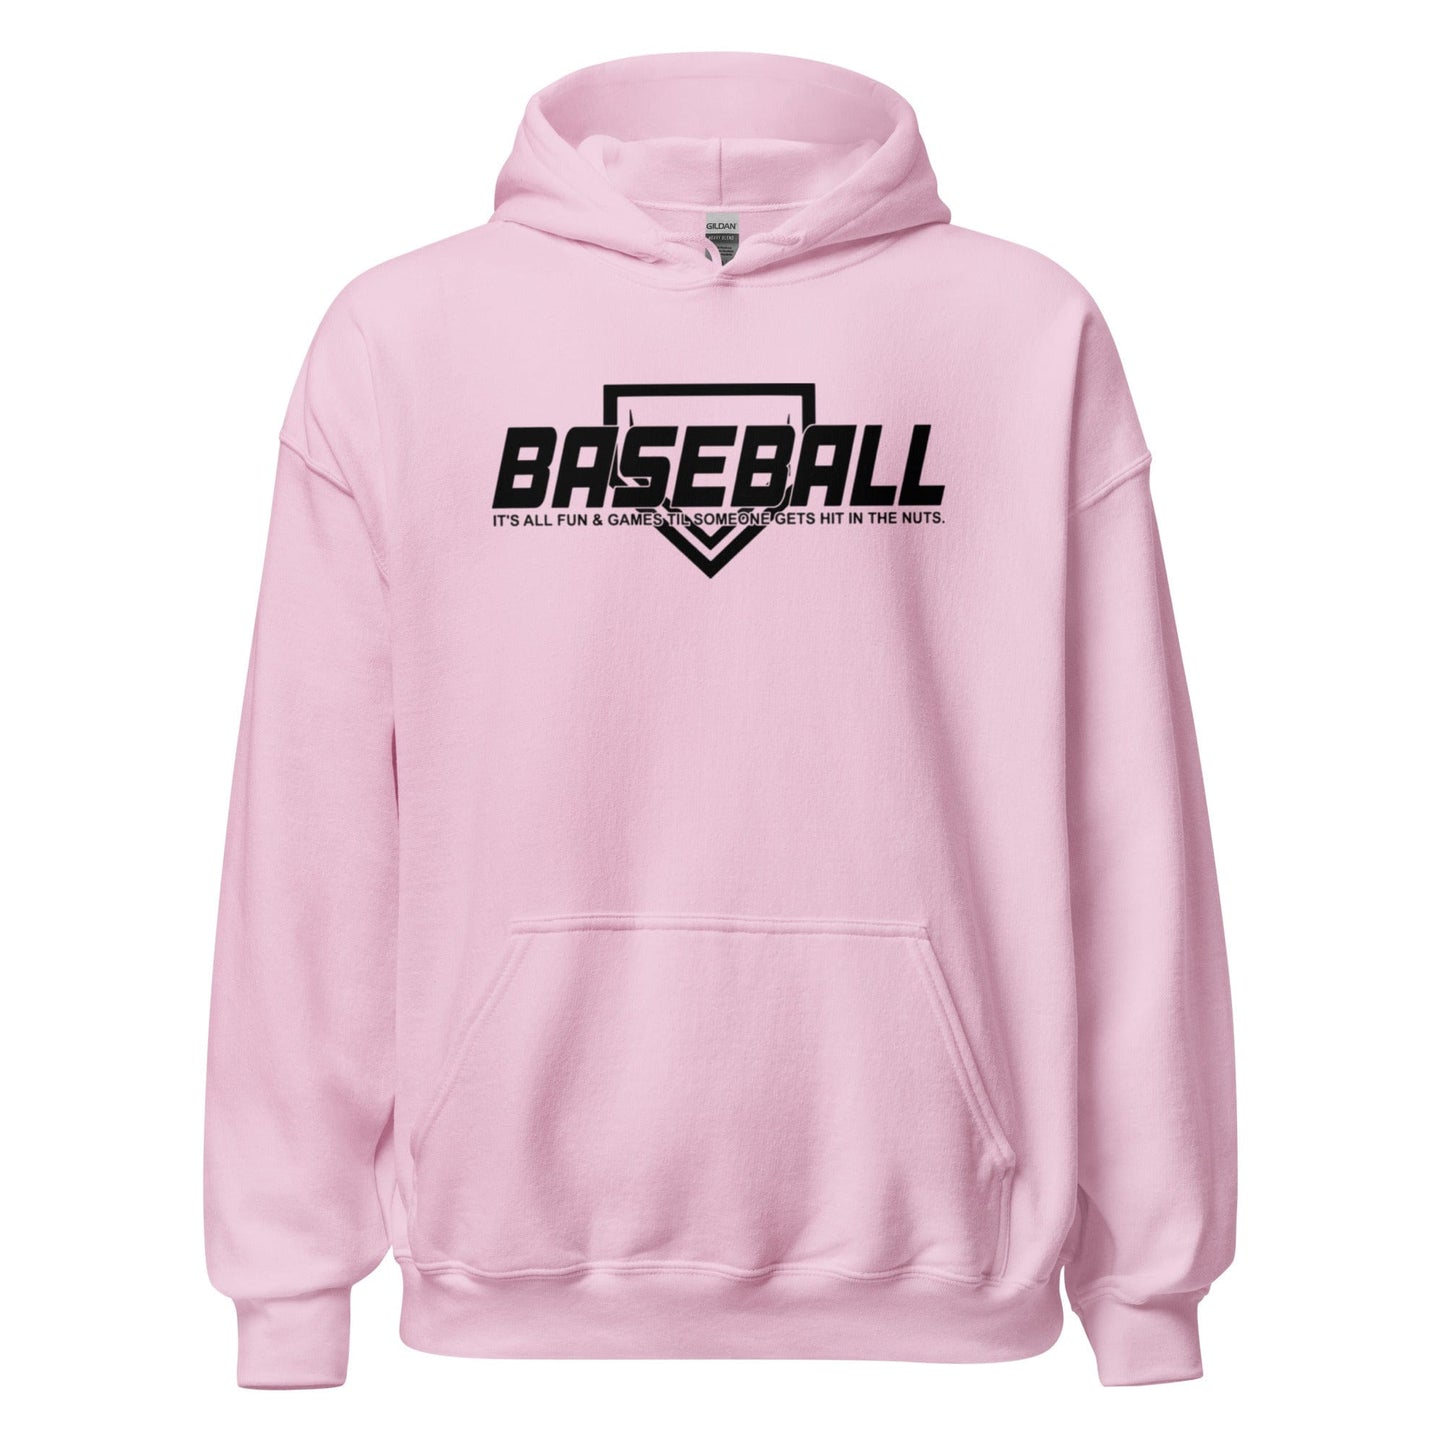 Baseball Its All Fun and Games - Adult Hoodie